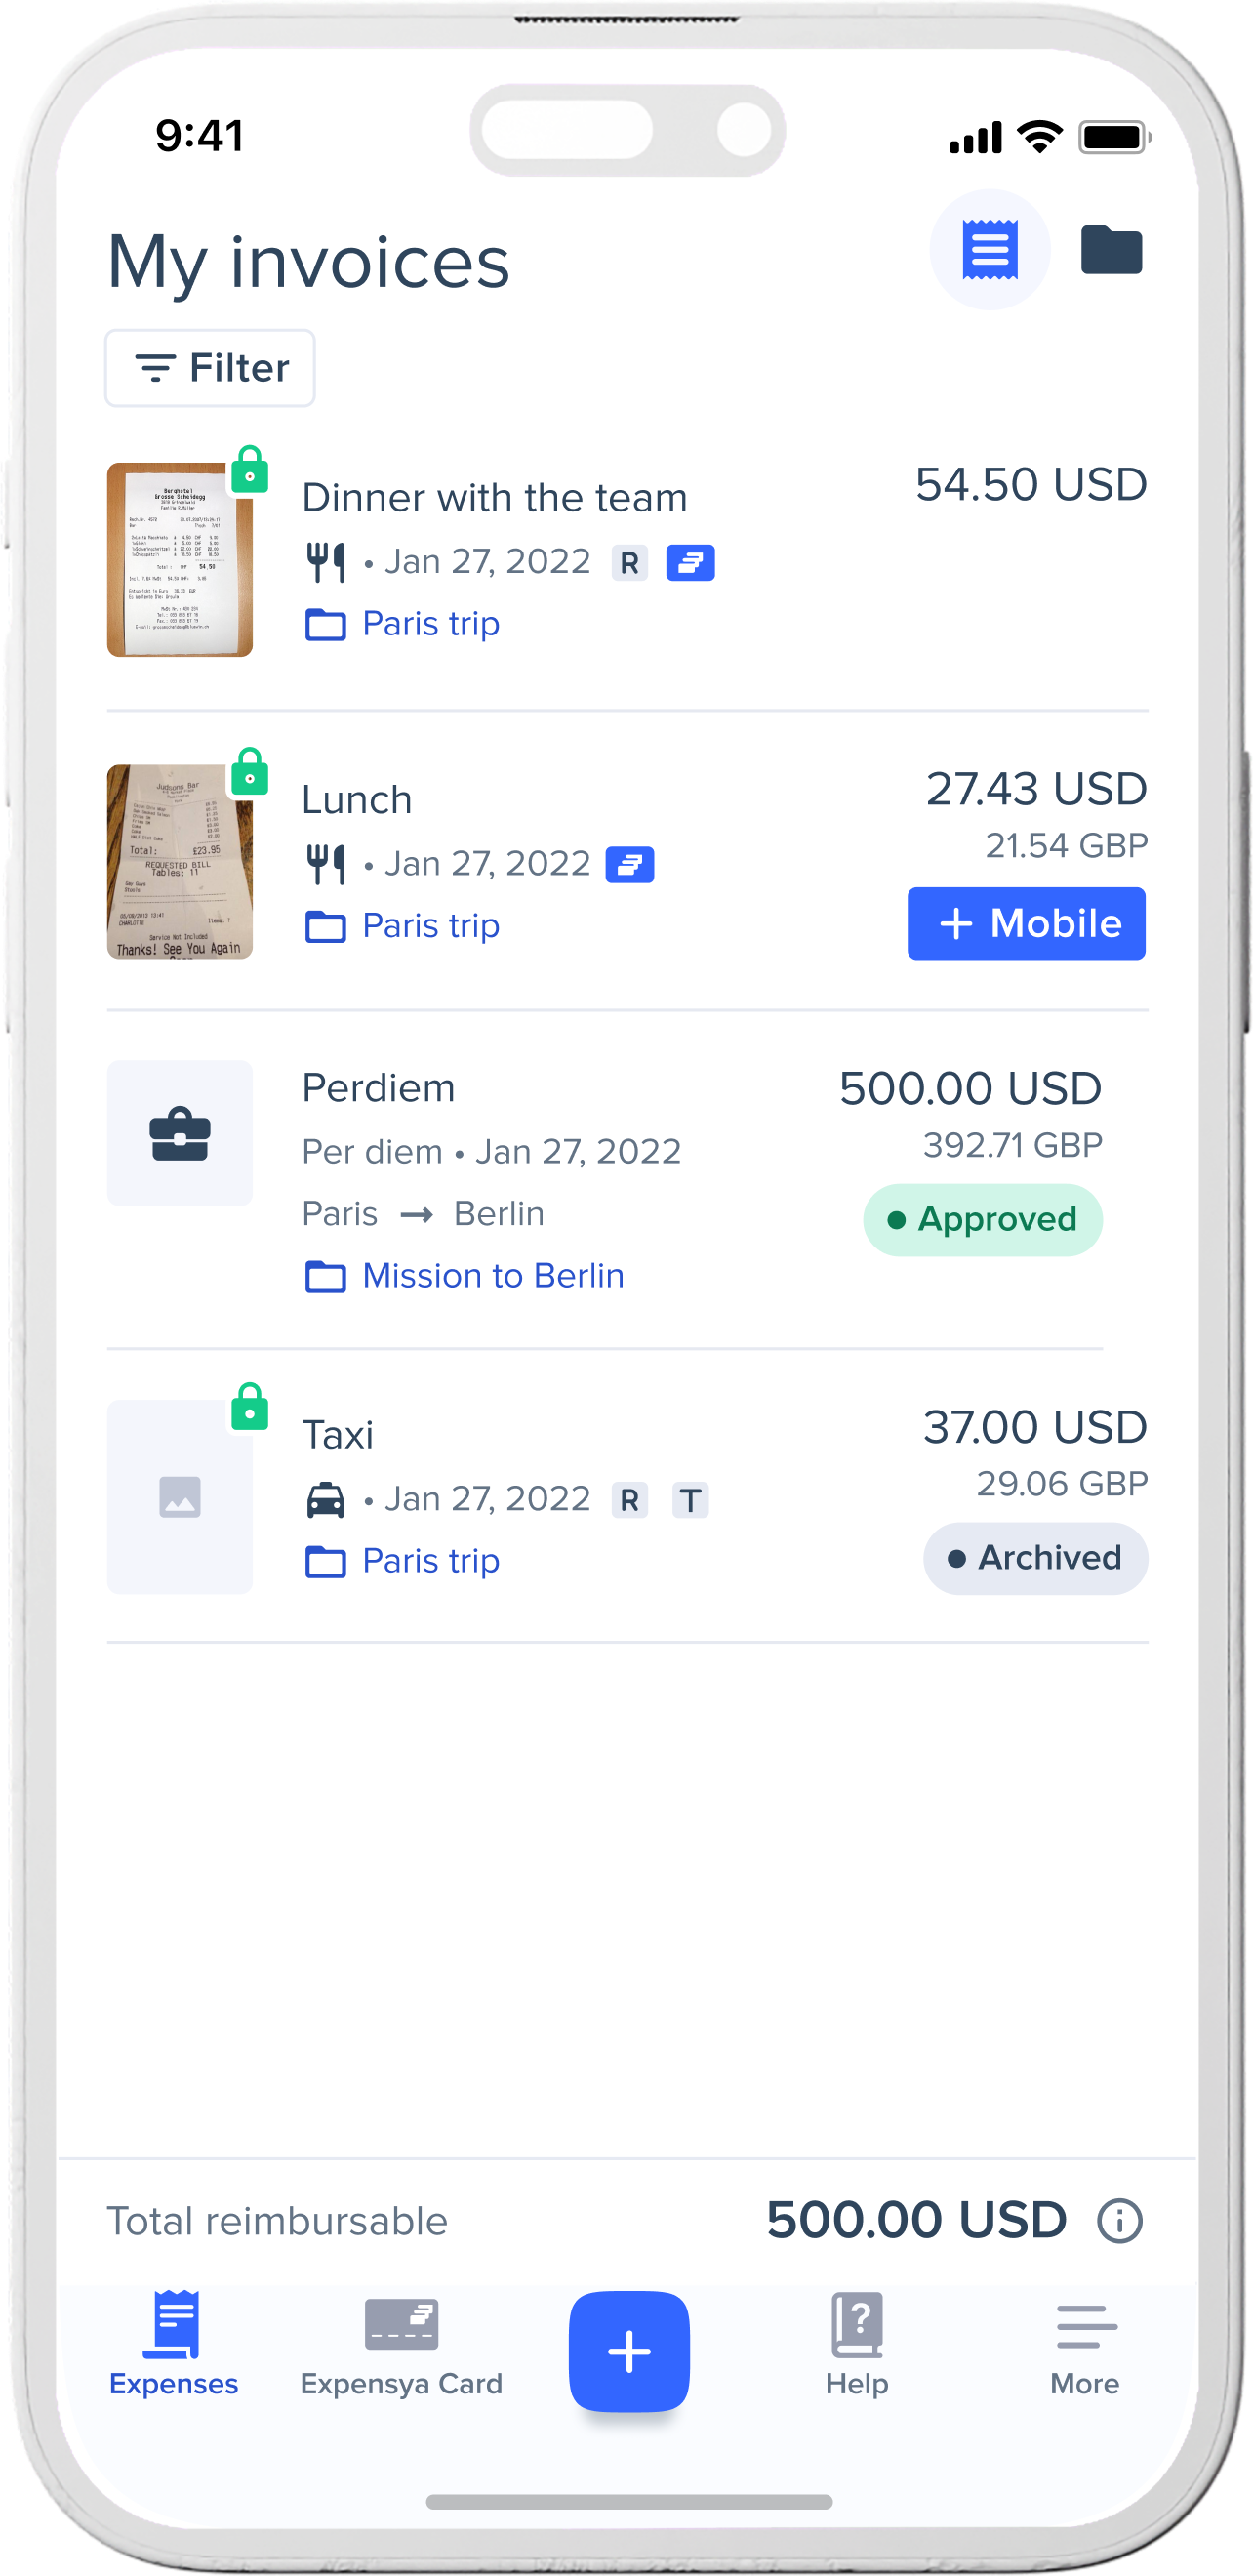 Invoices screen in mobile app